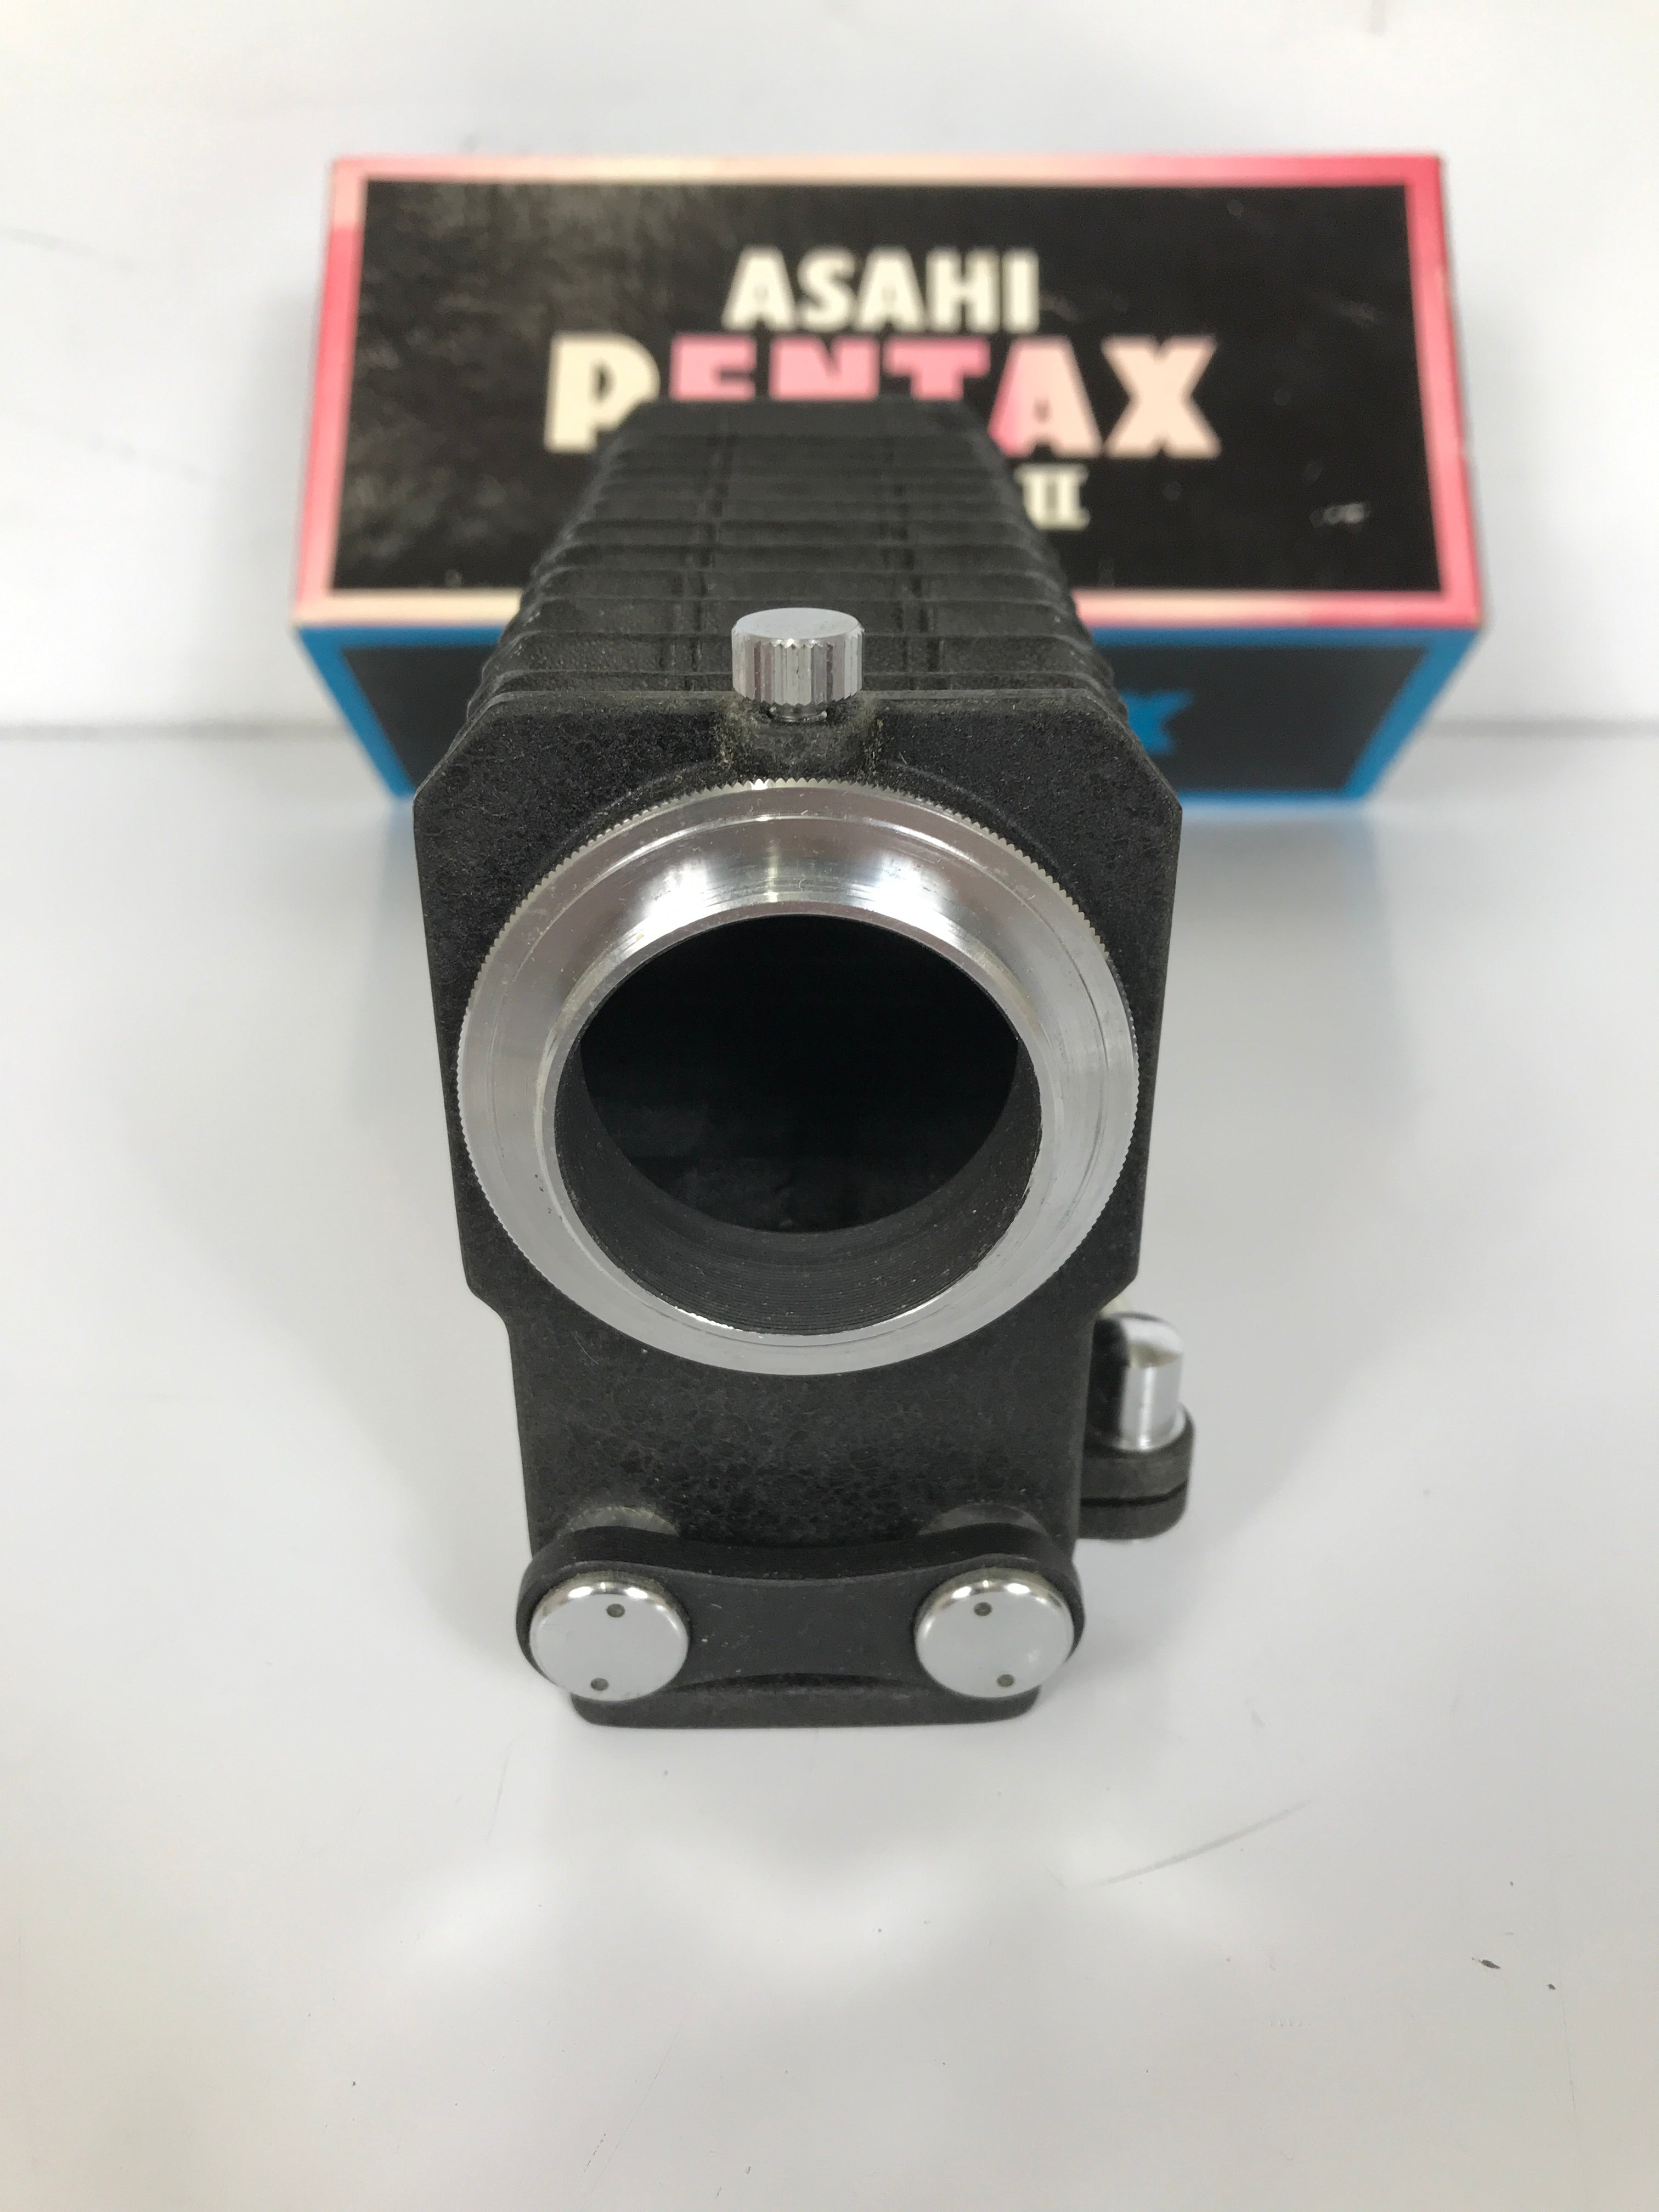 Asahi Pentax Bellows II and 35mm Slide Copier Attachment for Vintage Photography